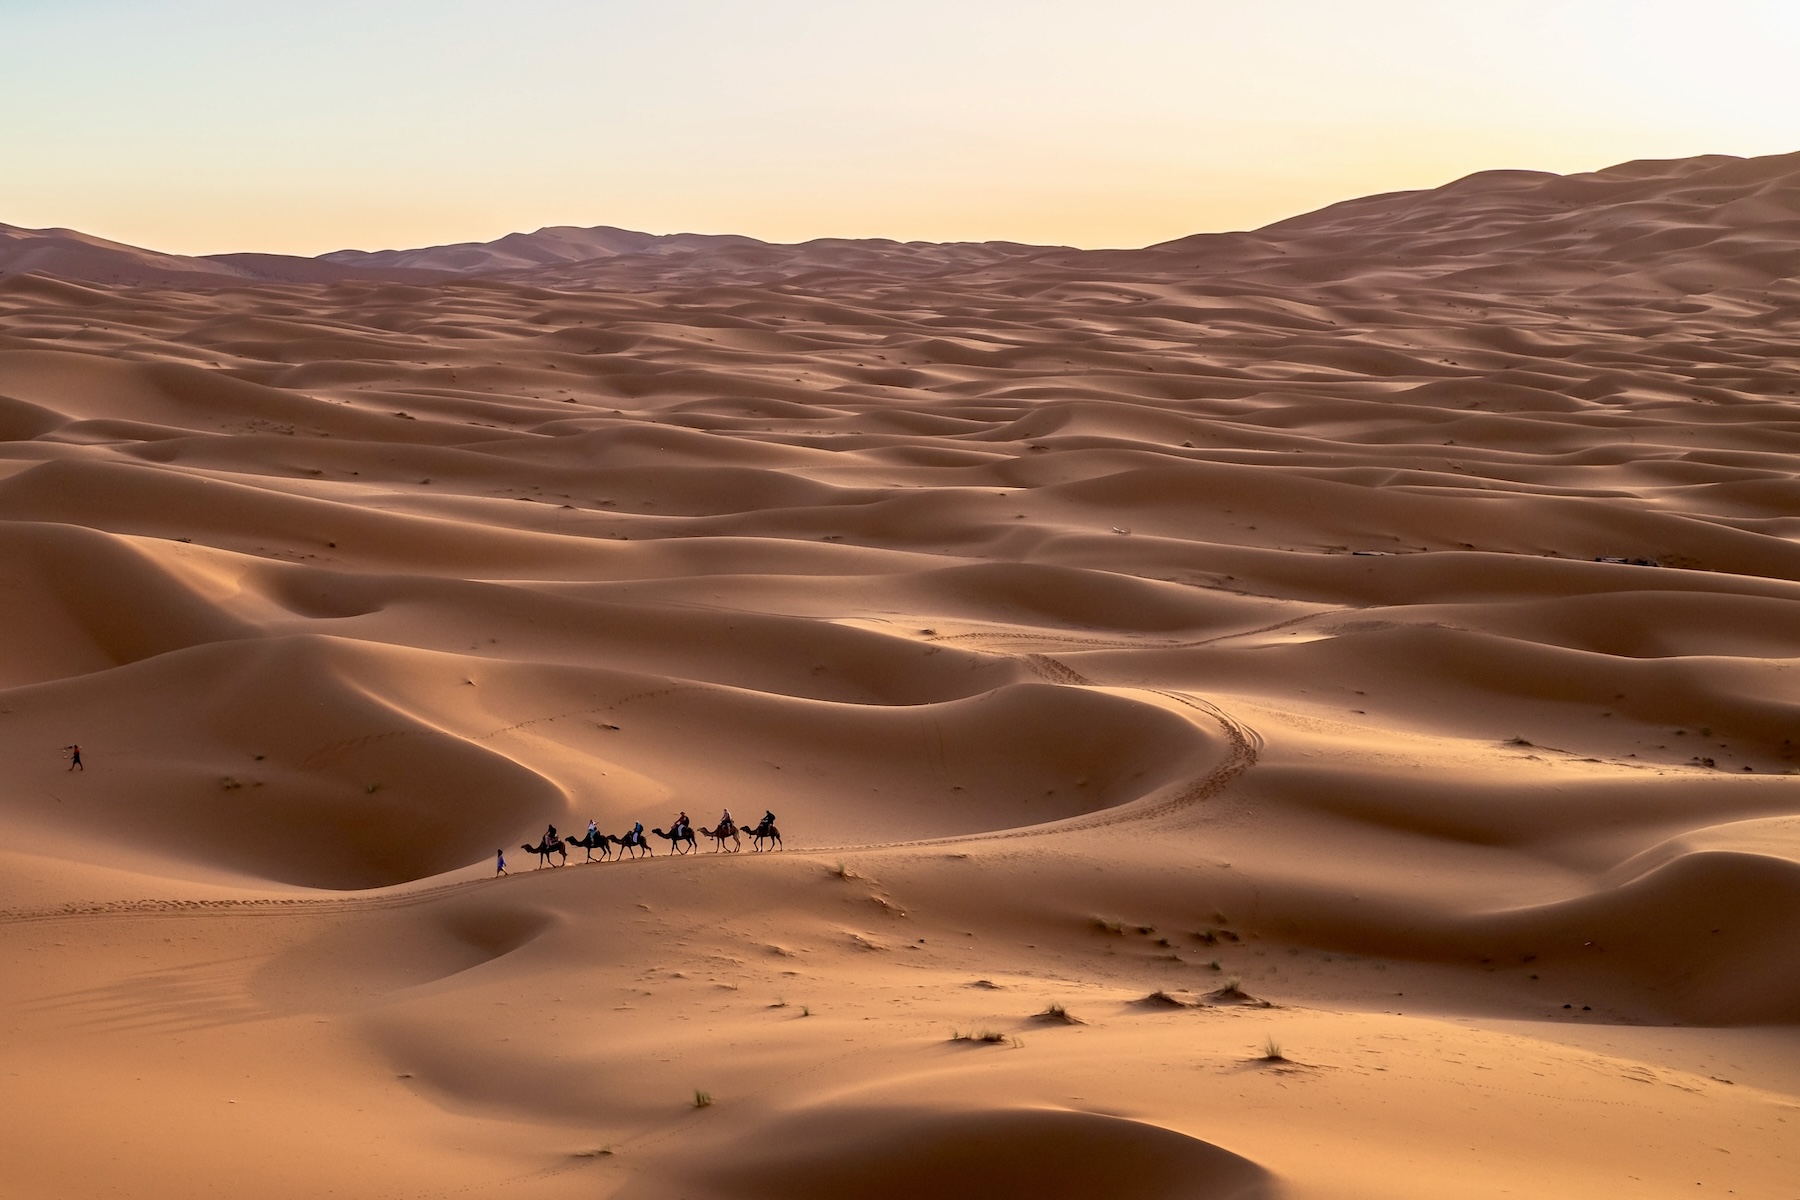 Travelers ride on camels amidst the backdrop of stunning dunes of the Sahara desert near Merzouga, Morocco